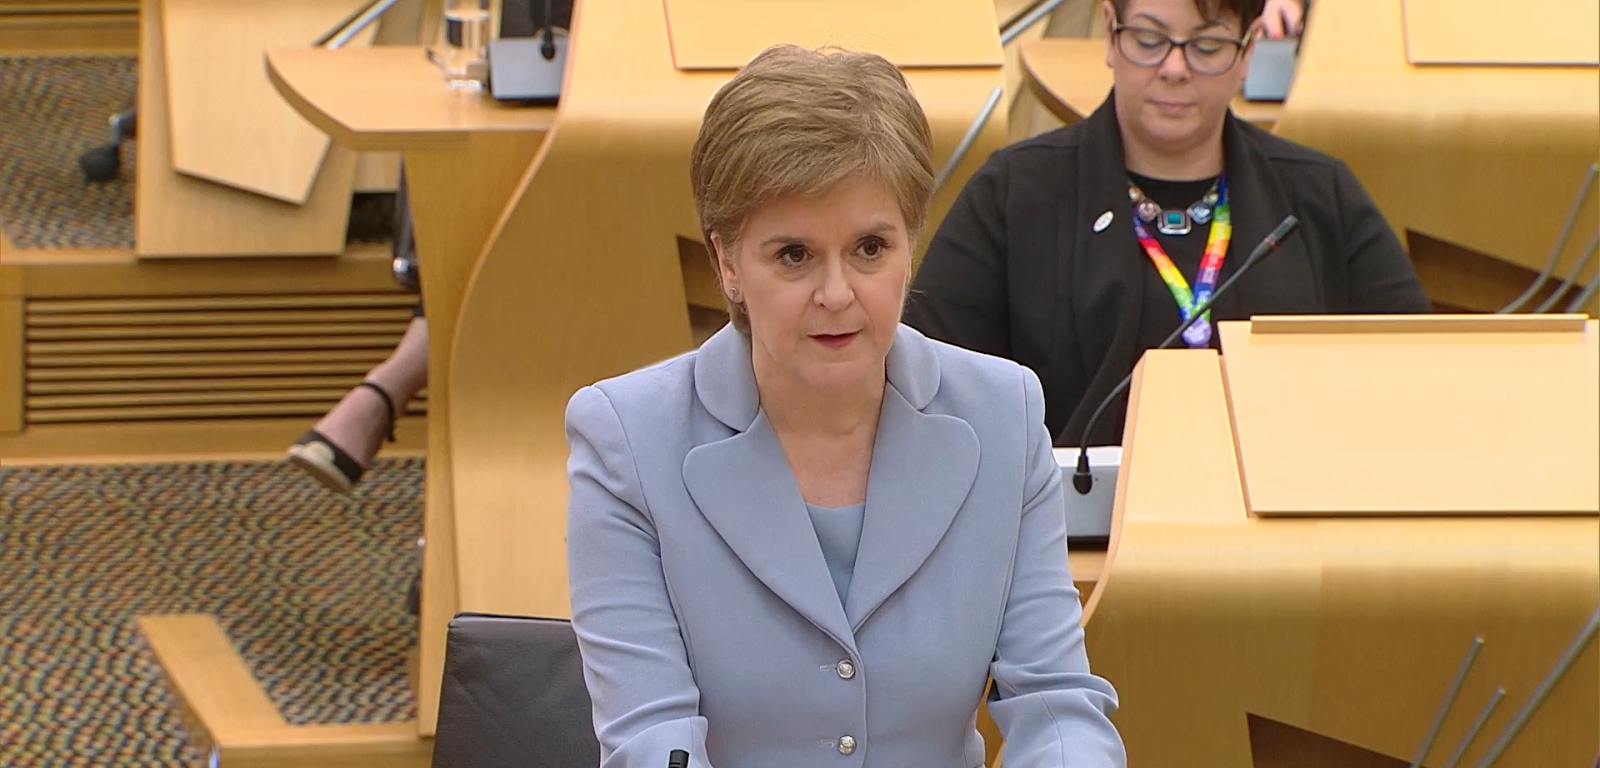 Image of first minister Nicola Sturgeon speaking at Scottish Parliament. She is standing and wearing a light blue suit